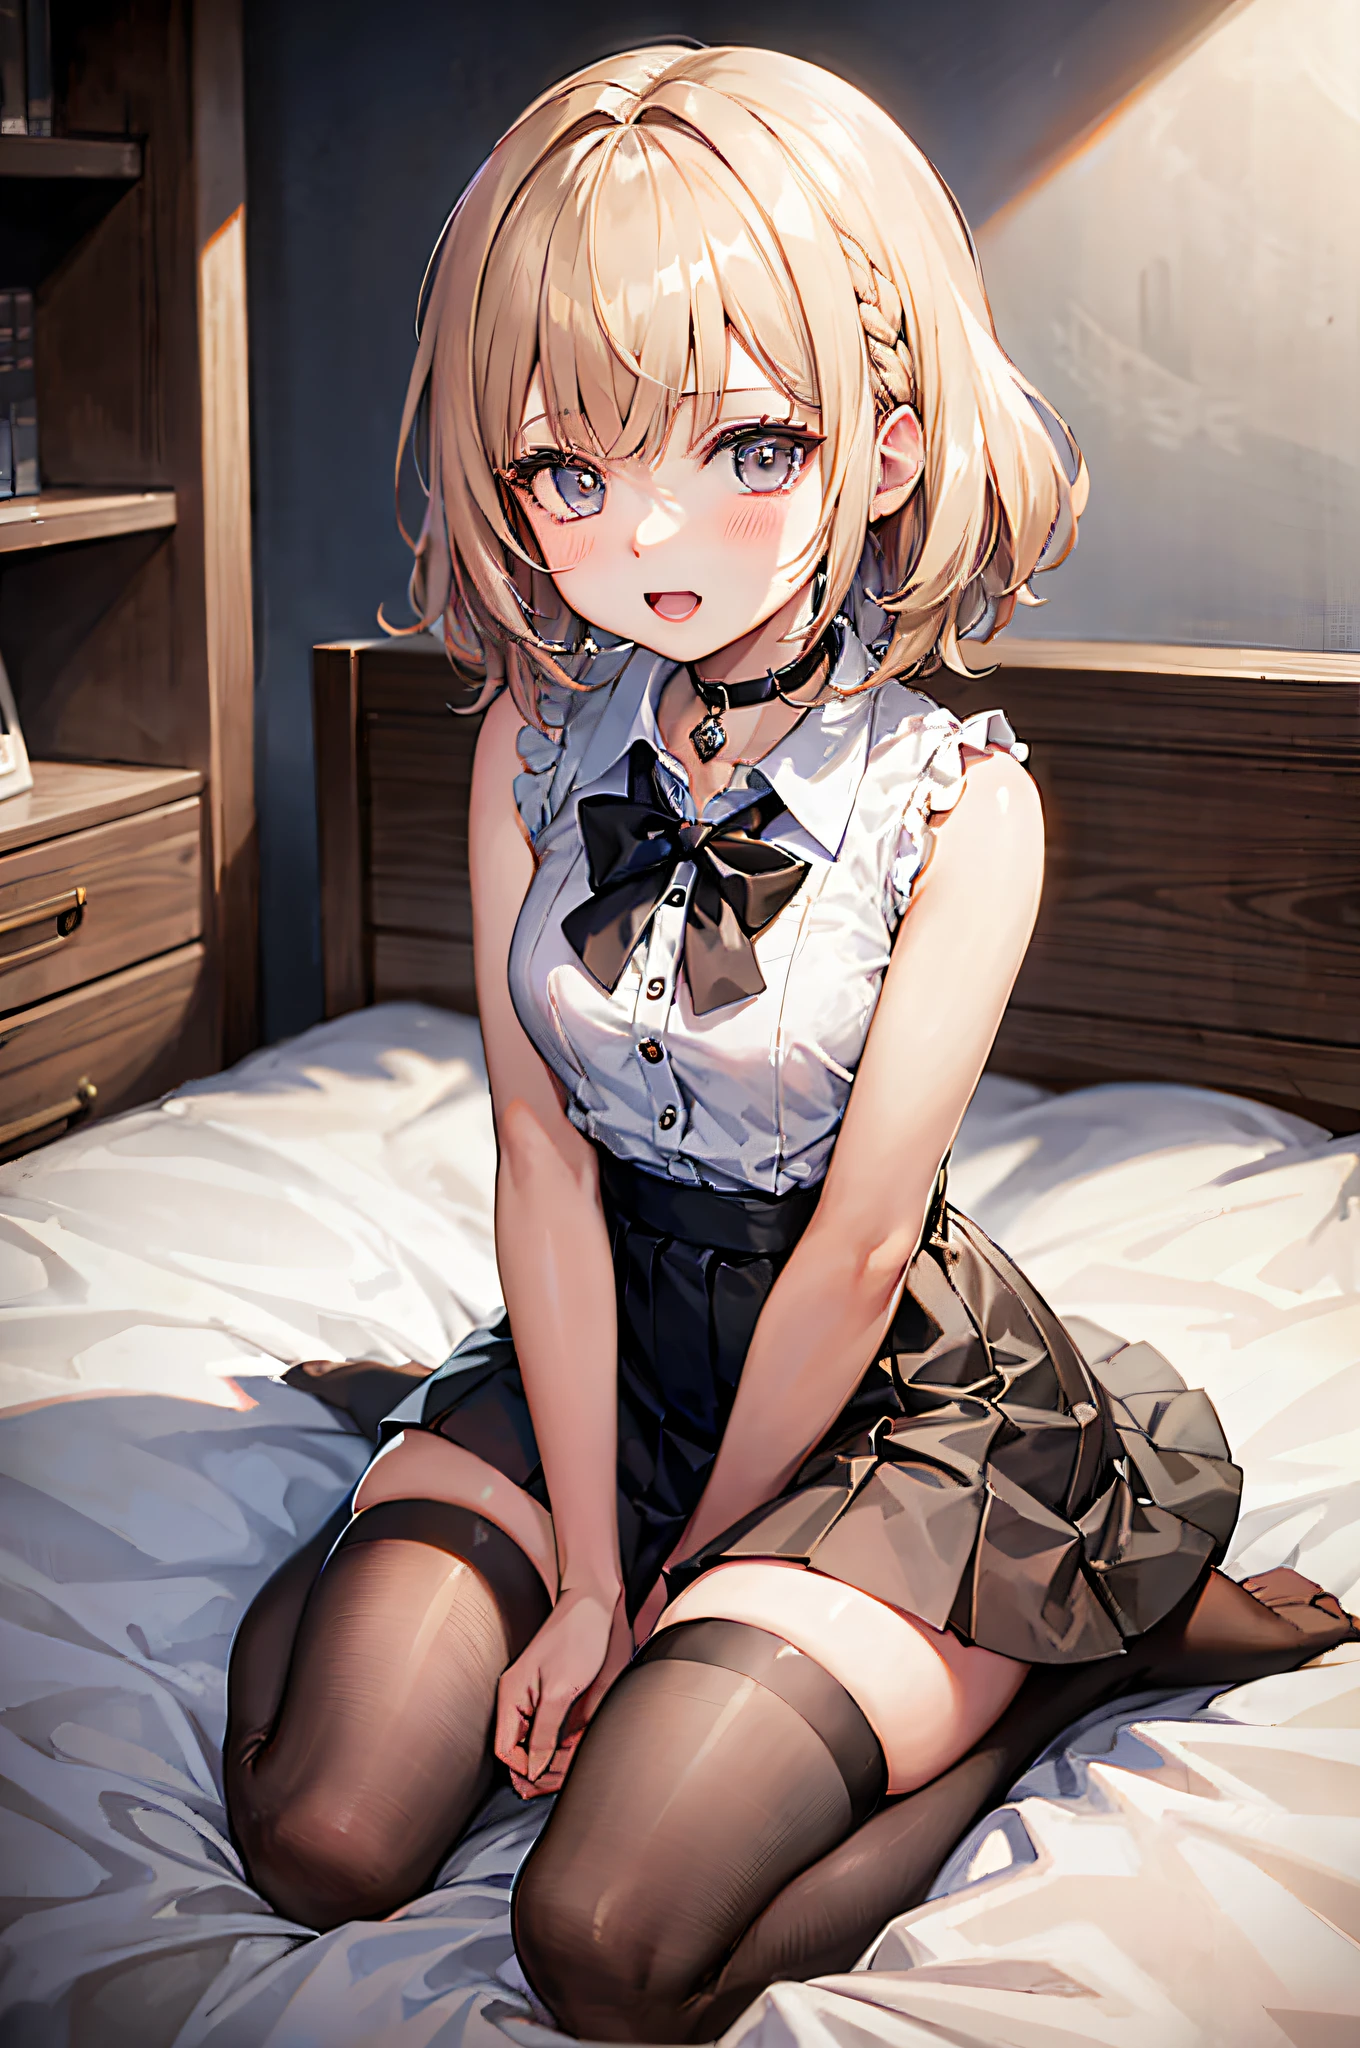 Anime - style image of woman sitting on bed in room, loli in dress, surreal schoolgirl, seductive anime girl, surreal schoolgirl, small curve , cute girl anime visual, cute anime girl, young anime girl, realistic , fine details. Girls Frontline